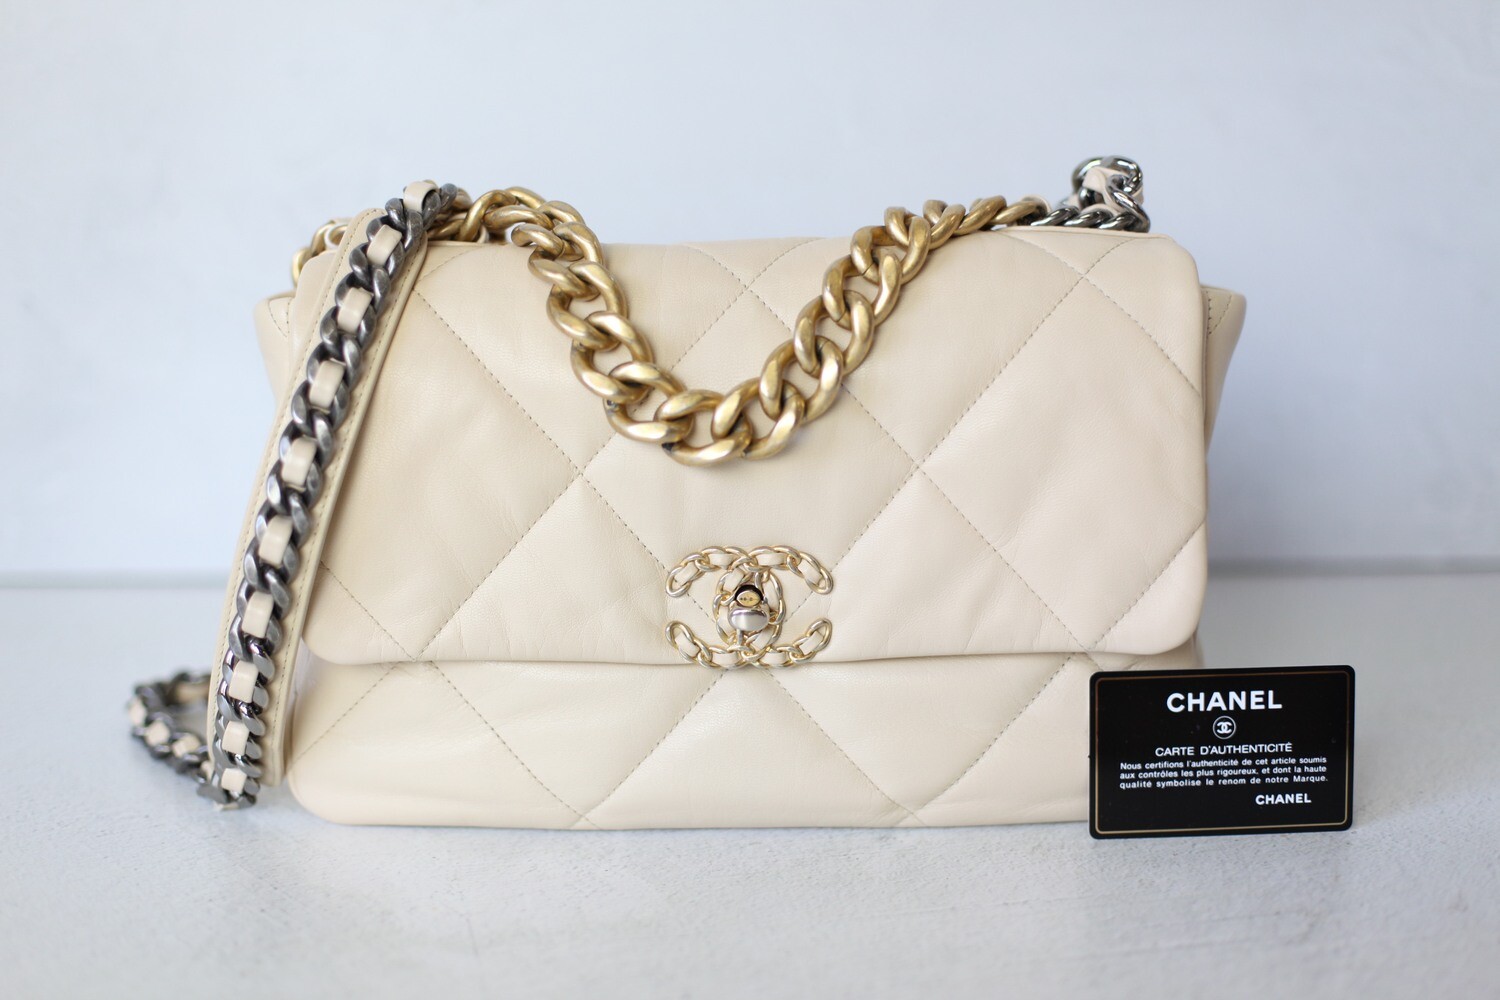 Chanel 19 Large, 20A Beige Goatskin with Gold Hardware, Preowned